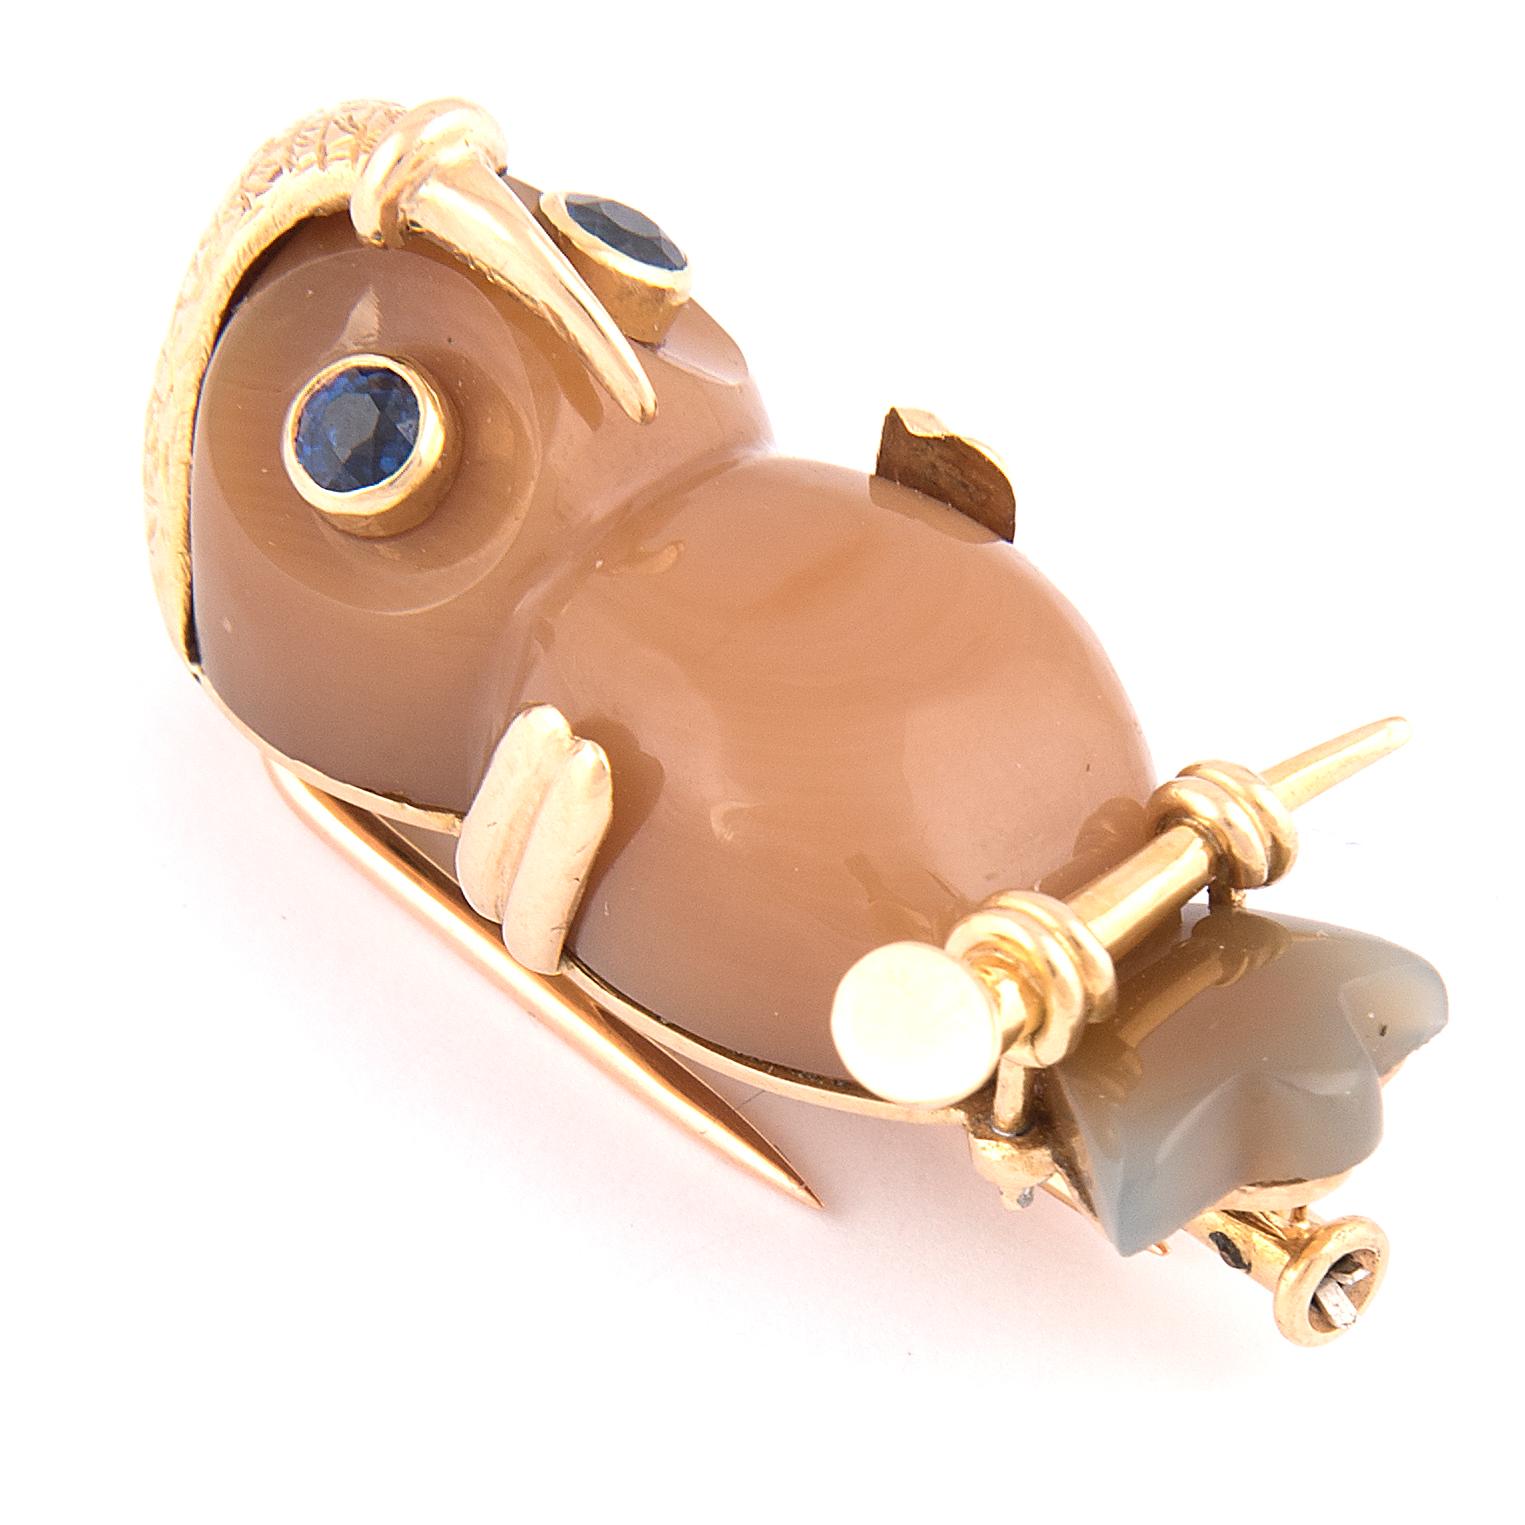 Owl brooch by Cartier Paris, 18k yellow gold, the body in Agate, the eyes in blue sapphire
Signed Cartier France, maker's mark, French hallmarks, marked 18kts and numbered 2853
Circa 1970s
In original box